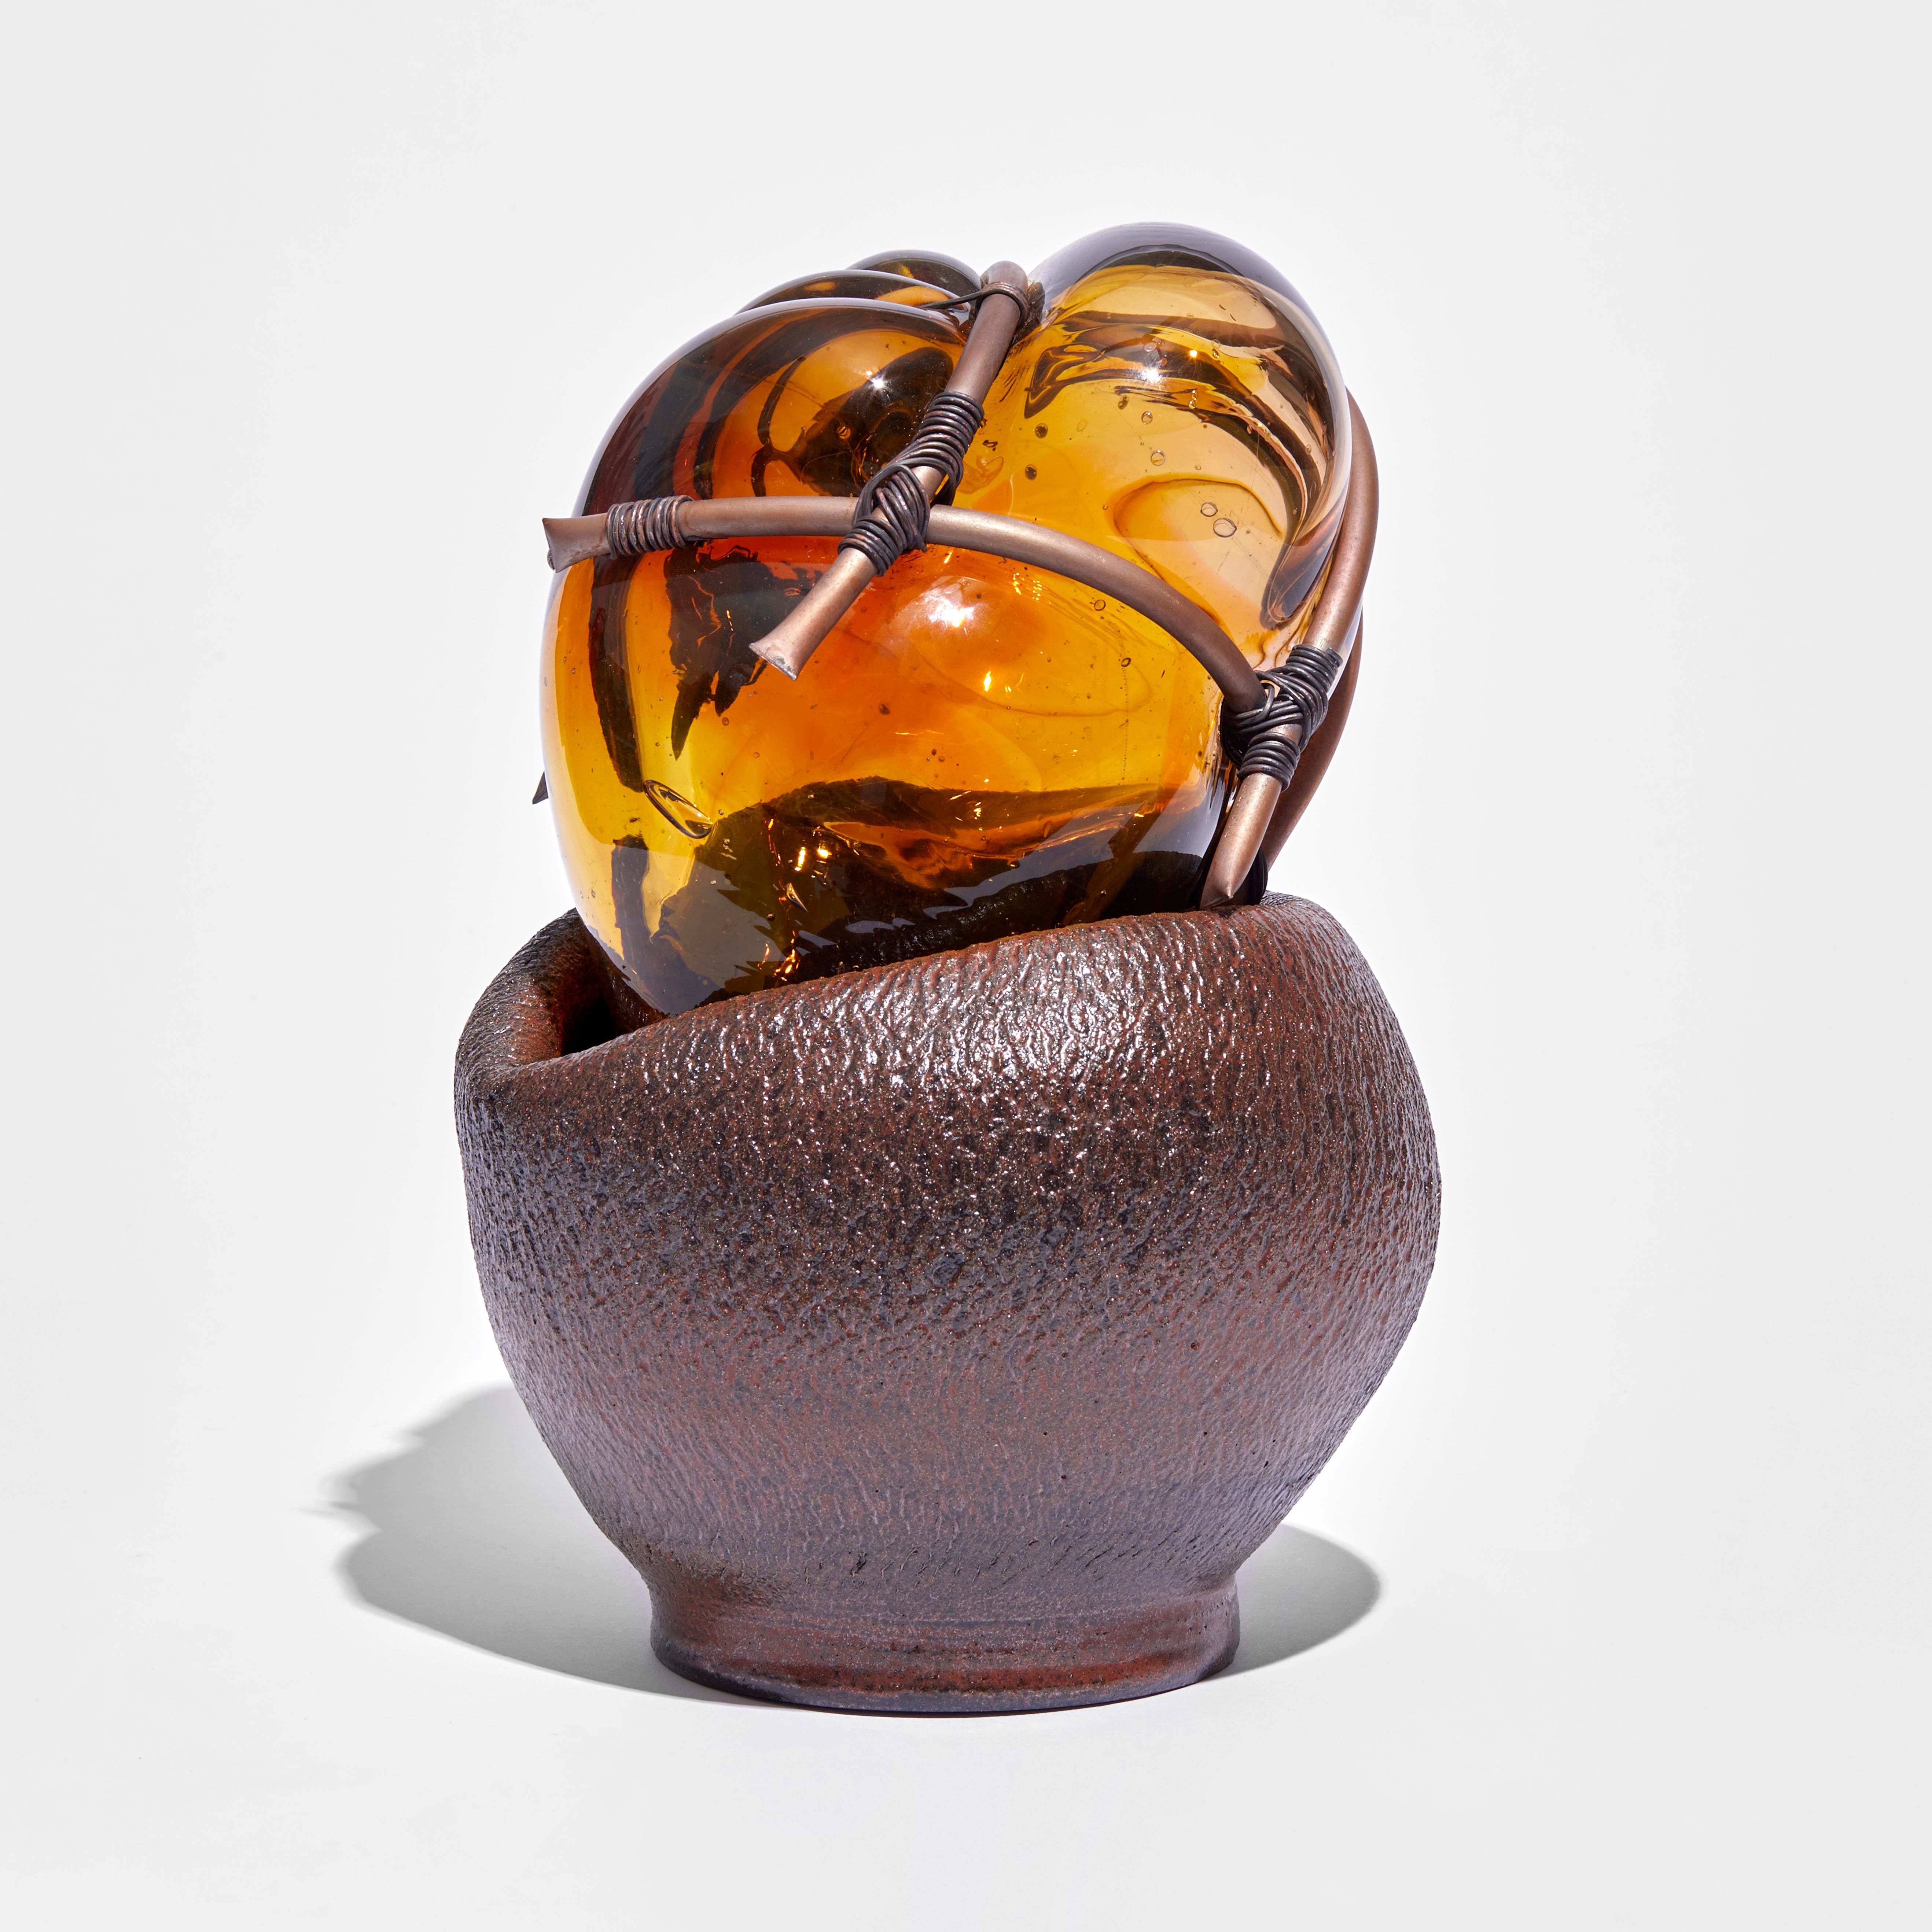 'Strange Fruit - The Congregation III' is a unique sculpture by the British artist, Chris Day, created from handblown & sculpted glass with terracotta, micro bore copper pipe and copper wire.

This piece was created as a part of the artist's